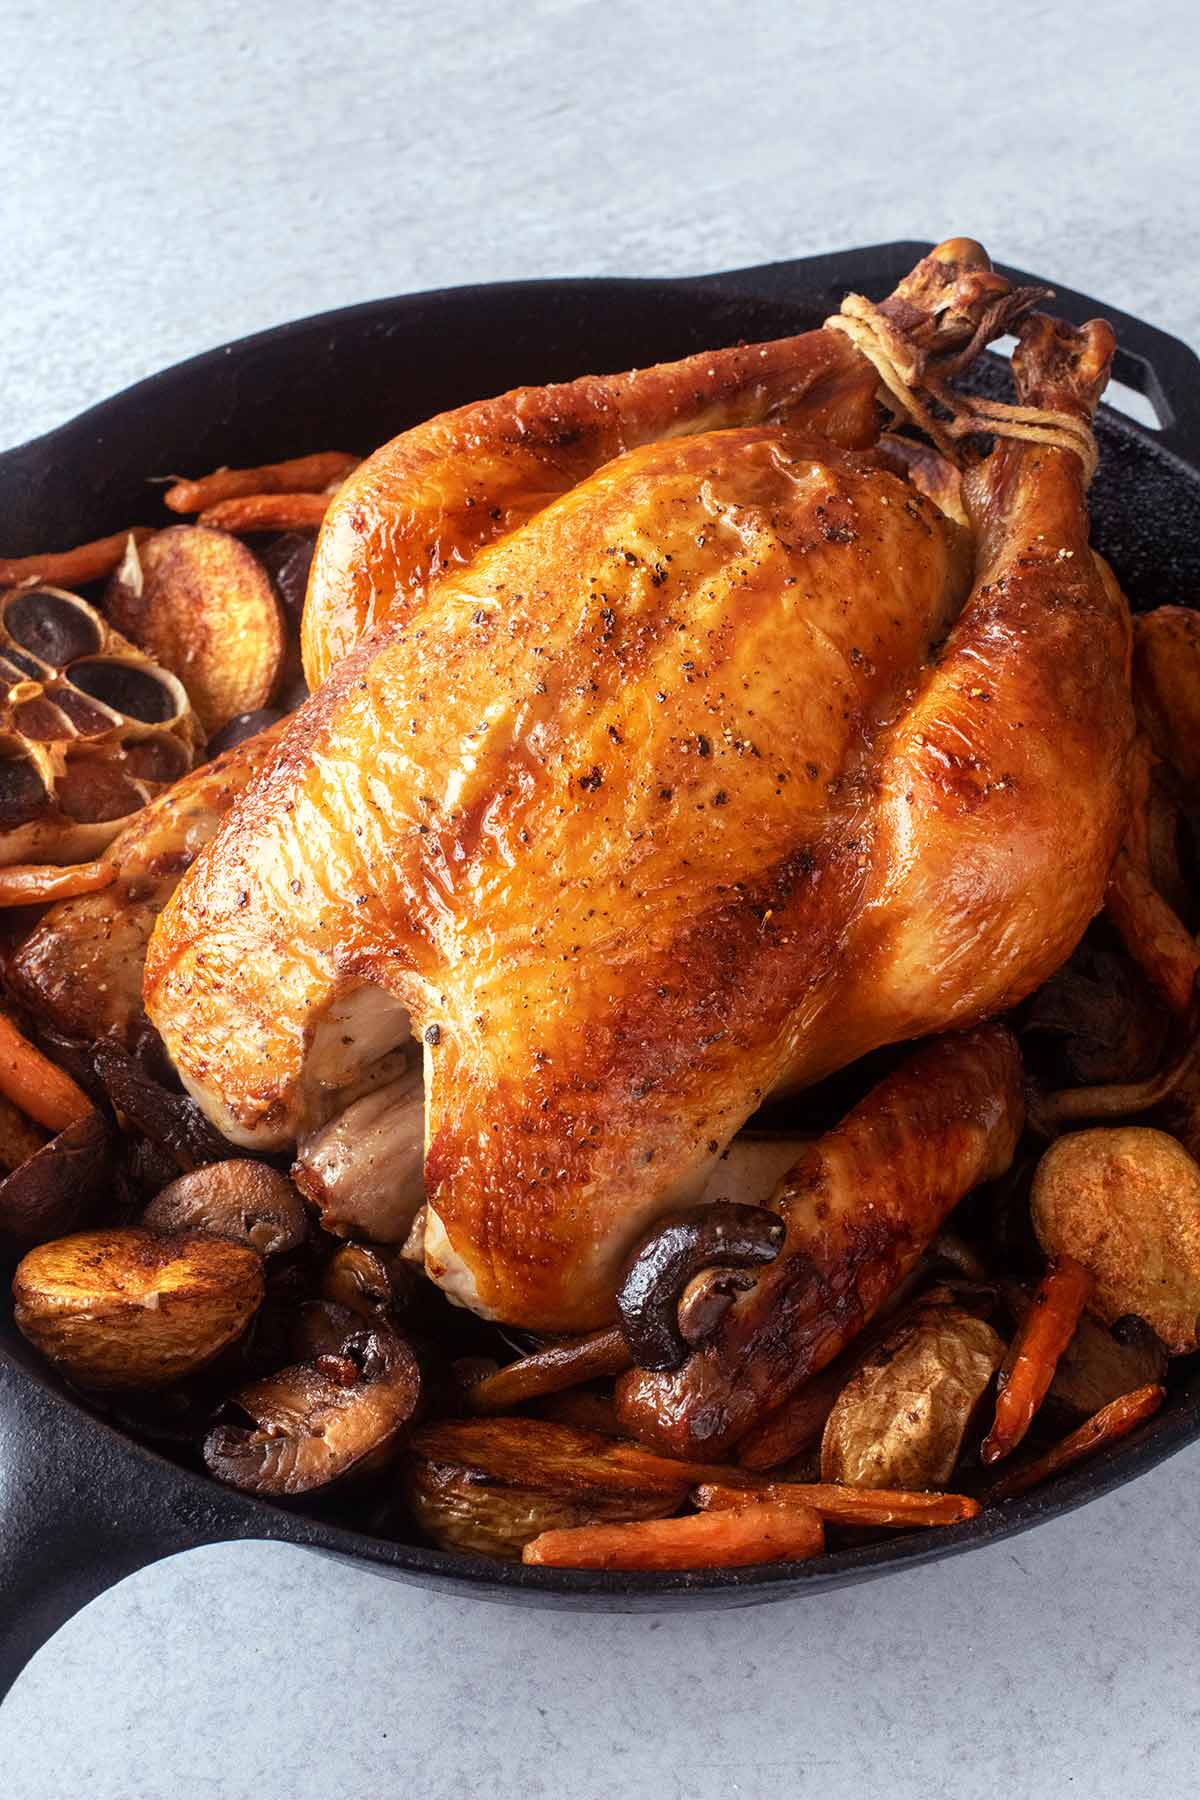 A best brined roast chicken in a cast iron Dutch oven surrounded by potatoes, mushrooms, carrots, and a halved head of garlic.